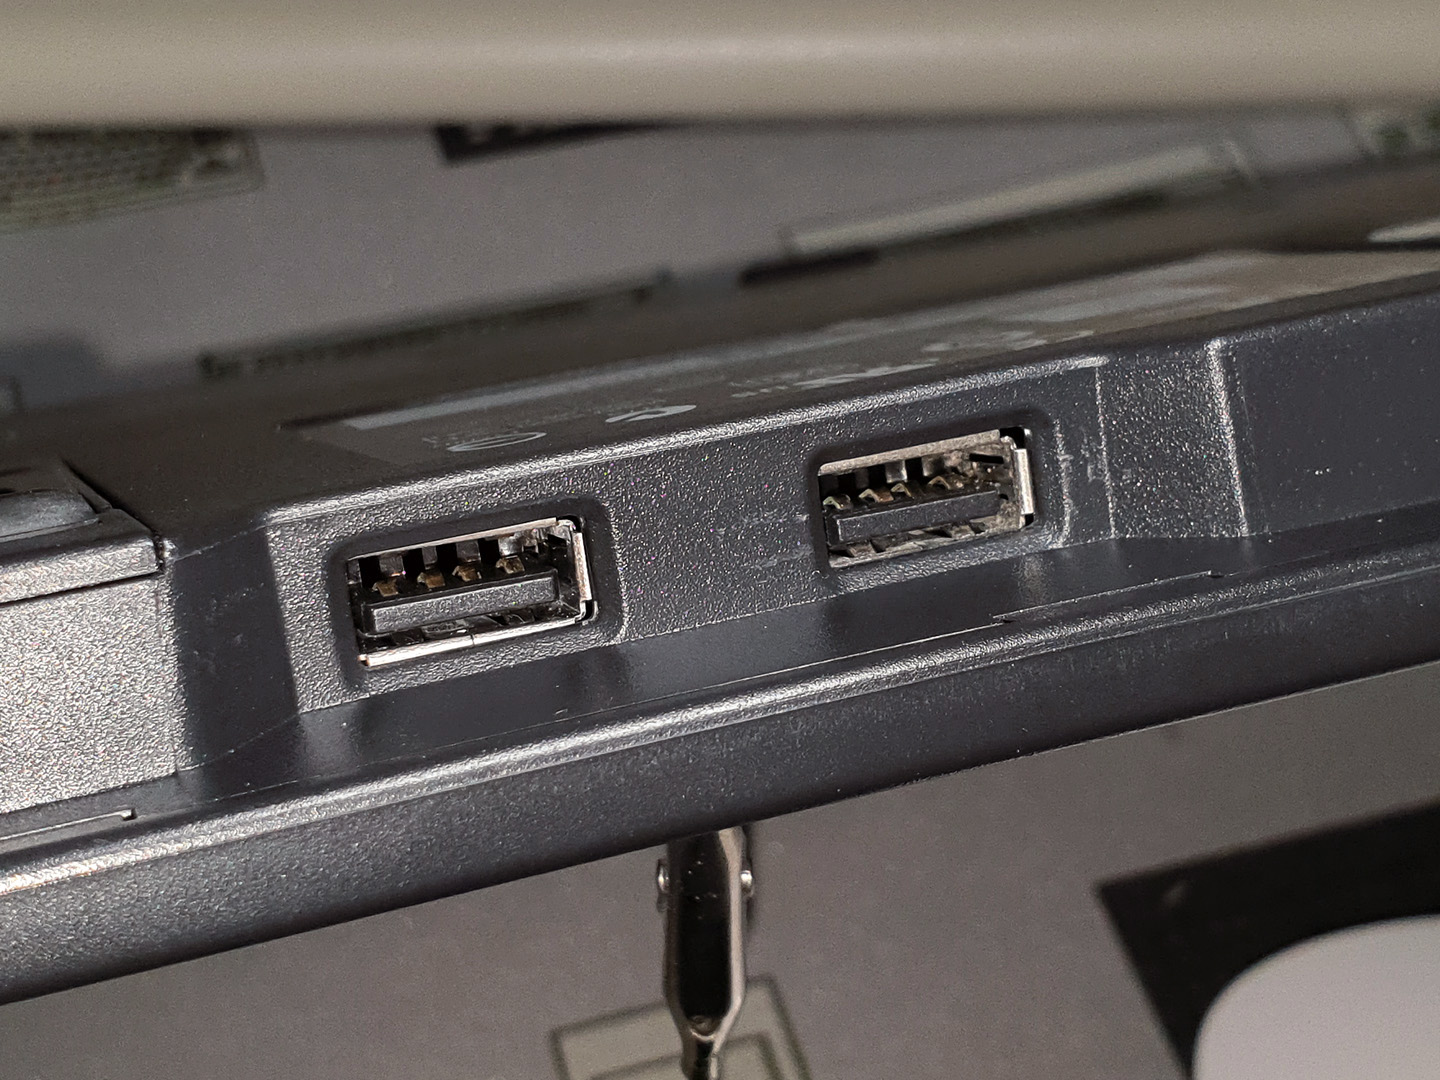 2004 SK-8845's USB ports<a class='source-link' href='/wiki?id=ibm88xxultranav#Sources'><sup>[ASK]</sup></a>